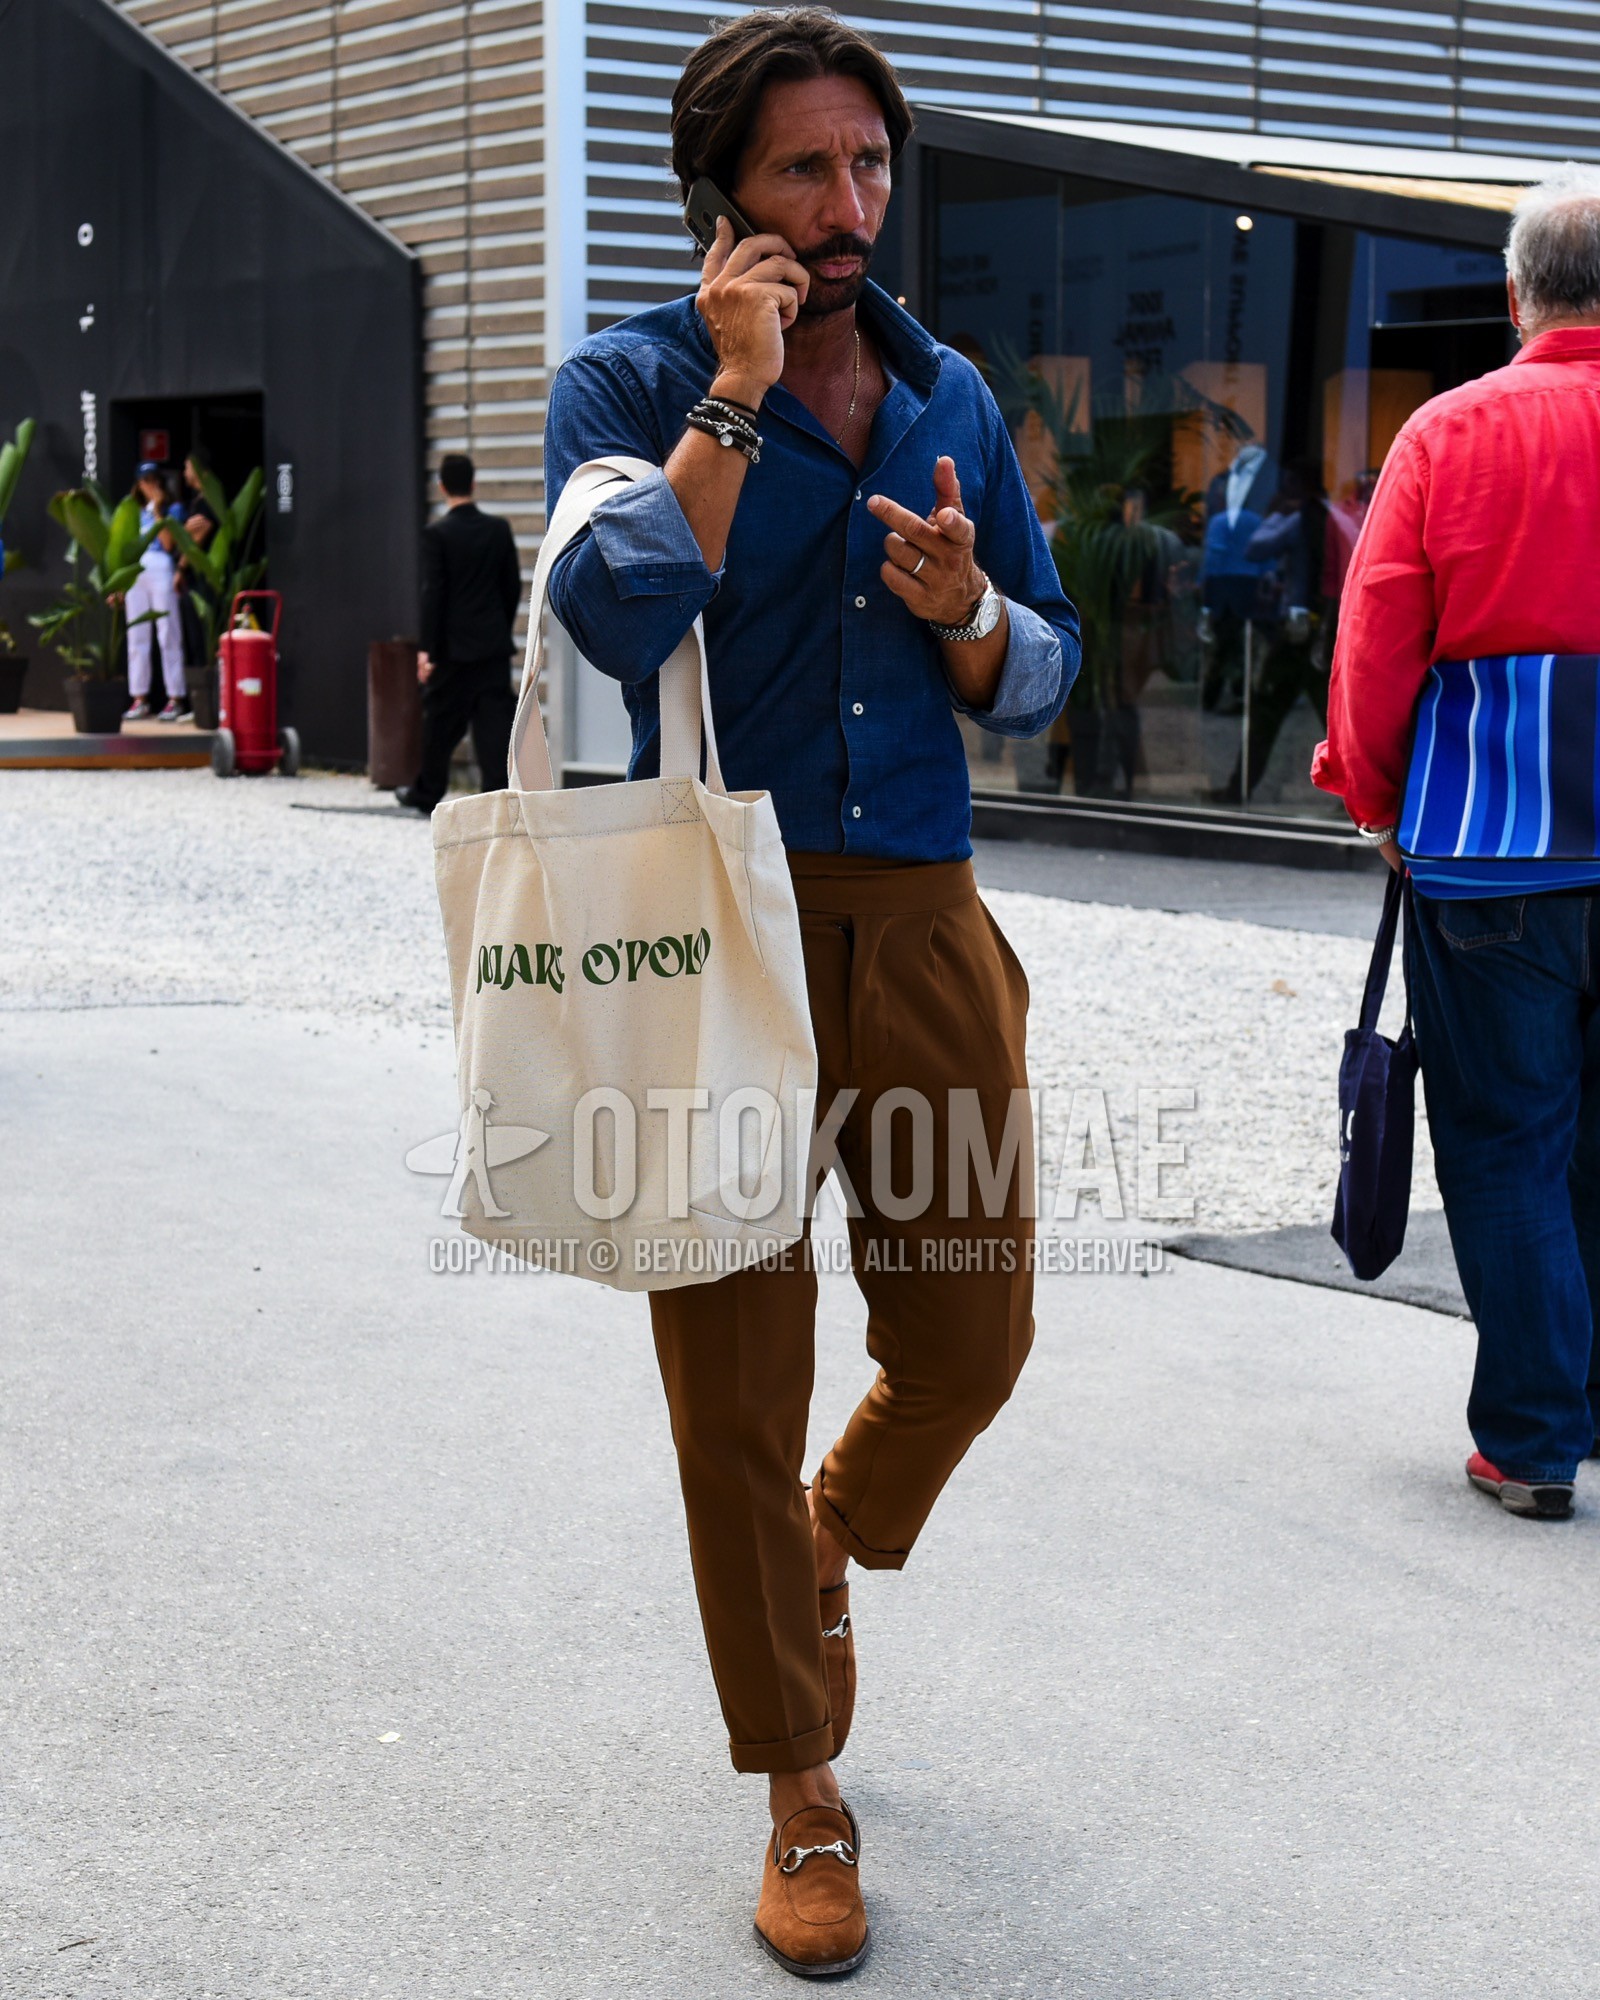 Men's spring summer outfit with blue plain denim shirt/chambray shirt, brown plain slacks, brown bit loafers leather shoes, white deca logo tote bag.